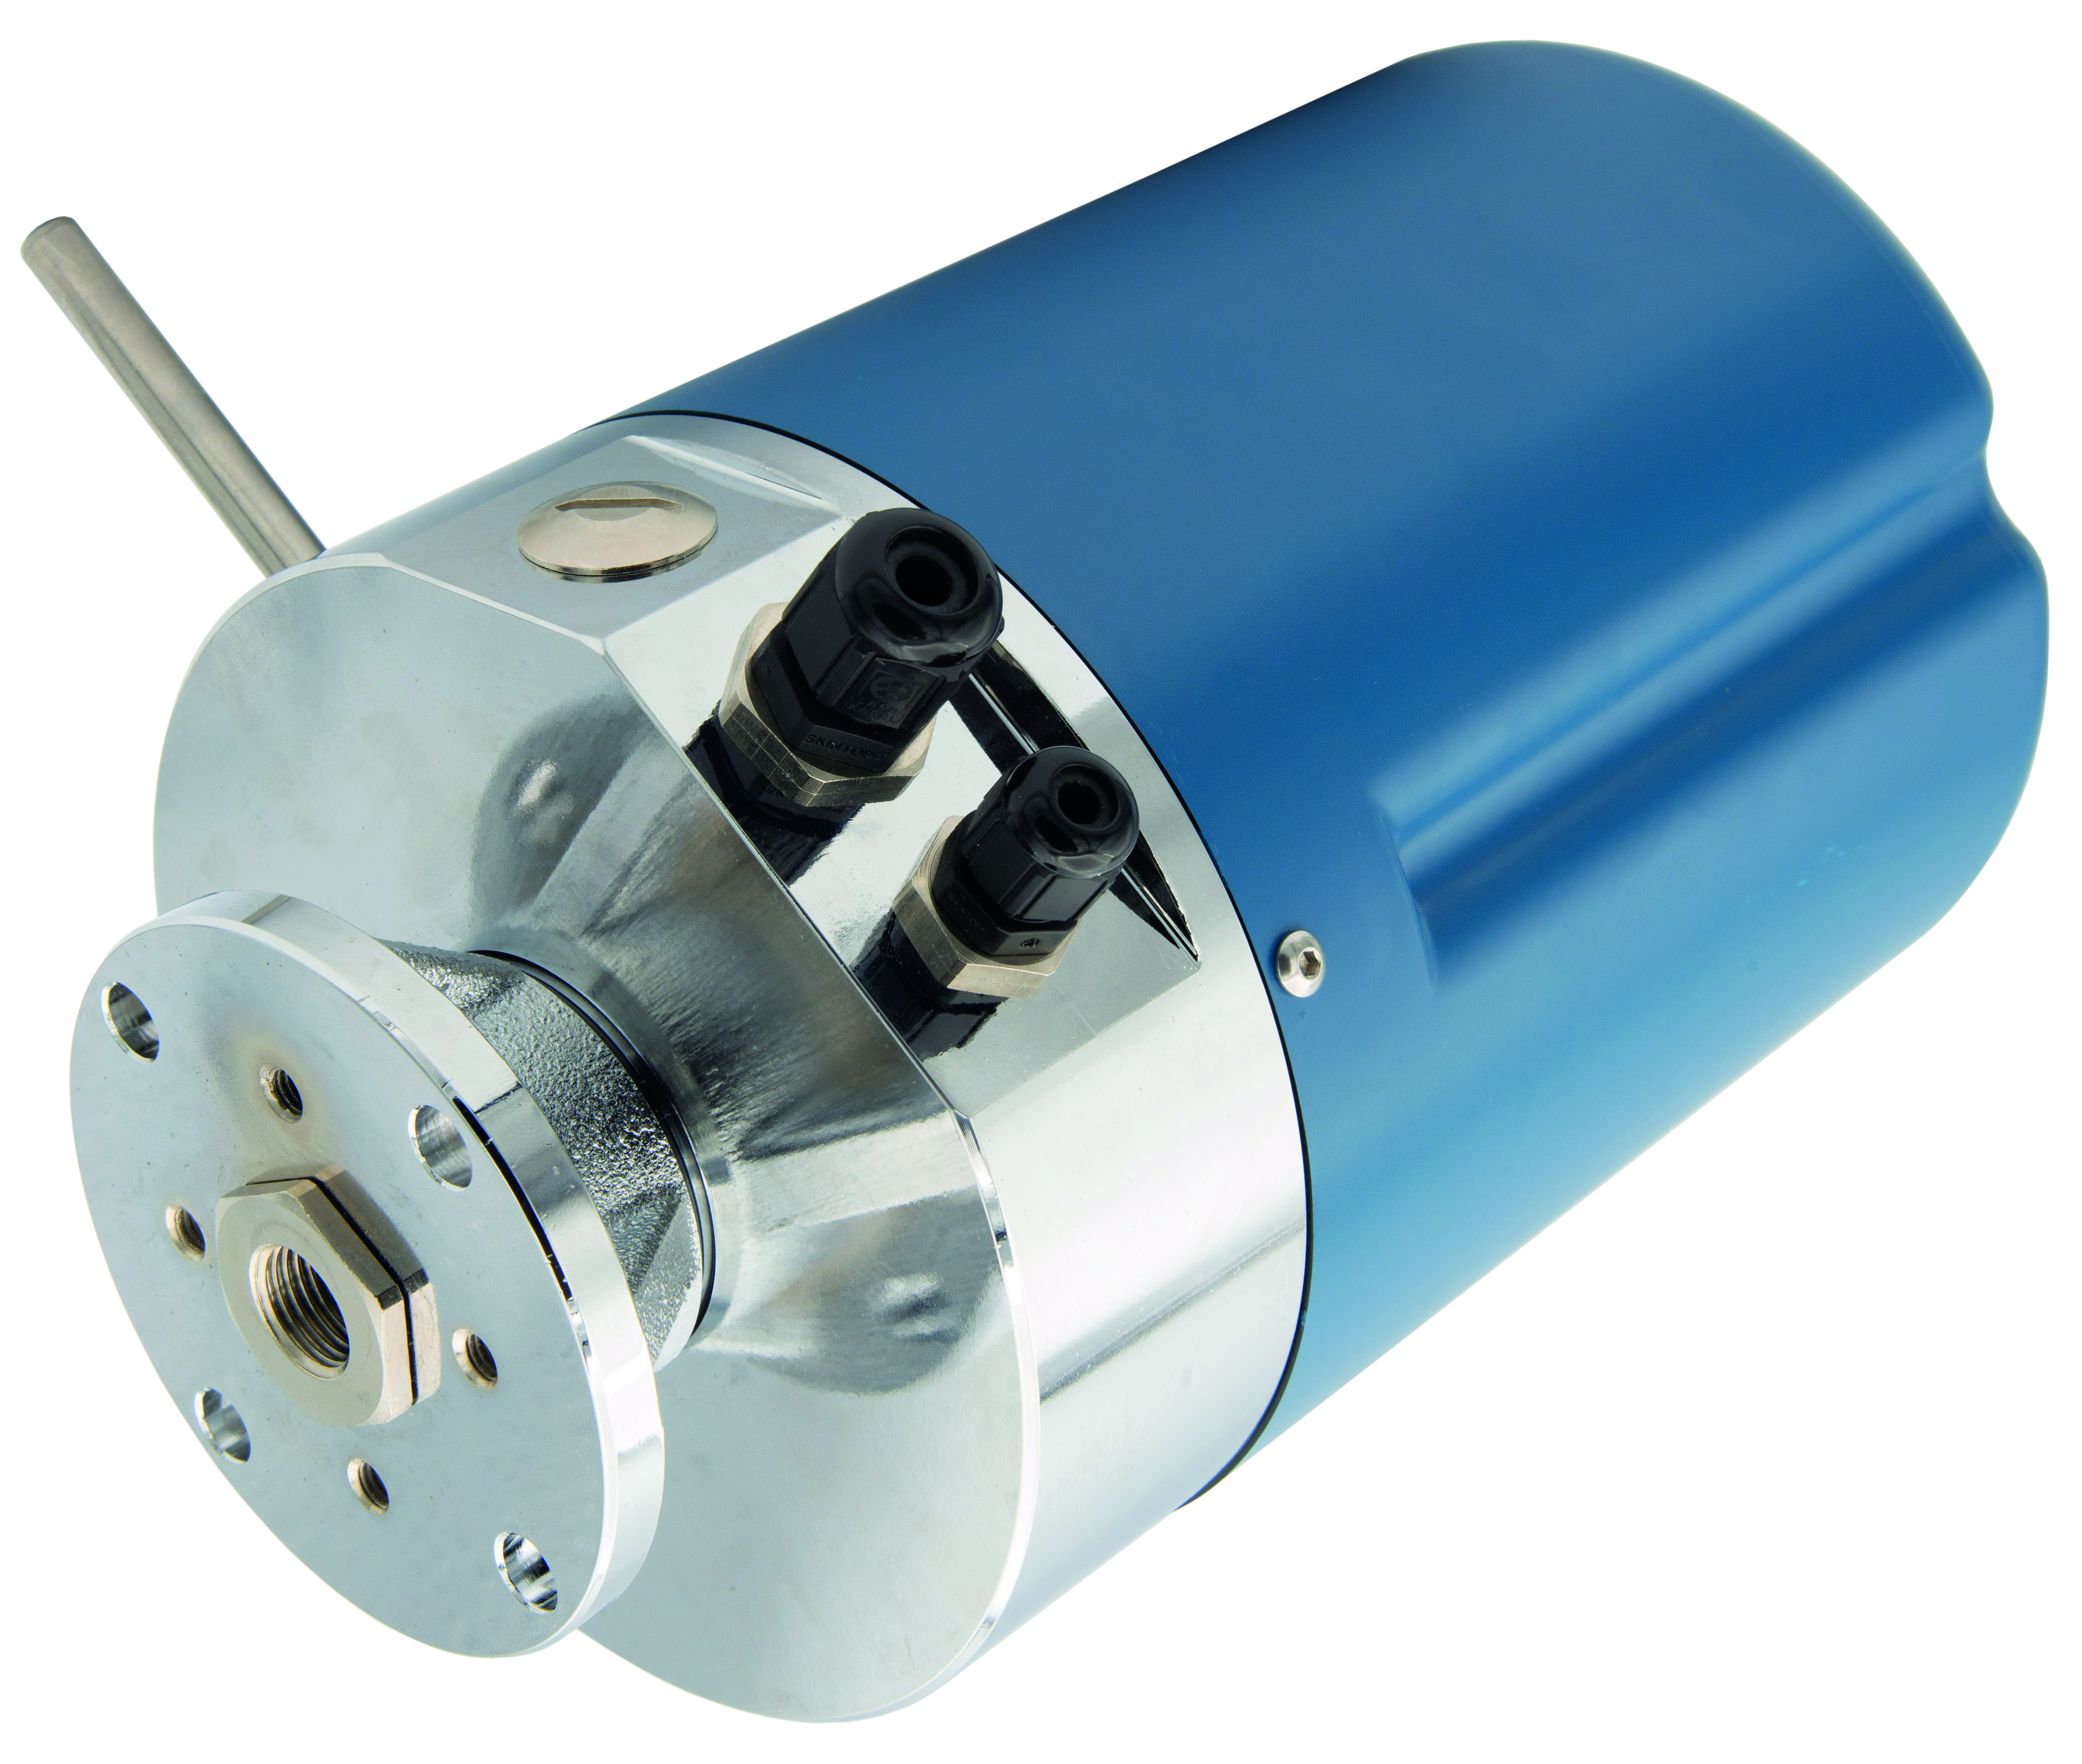 Figure 1: Slip ring solutions can vary vastly in terms of their size and application, depending on the desired specifications. Here is an example of a an SRD-30 slip ring. Source: Deublin